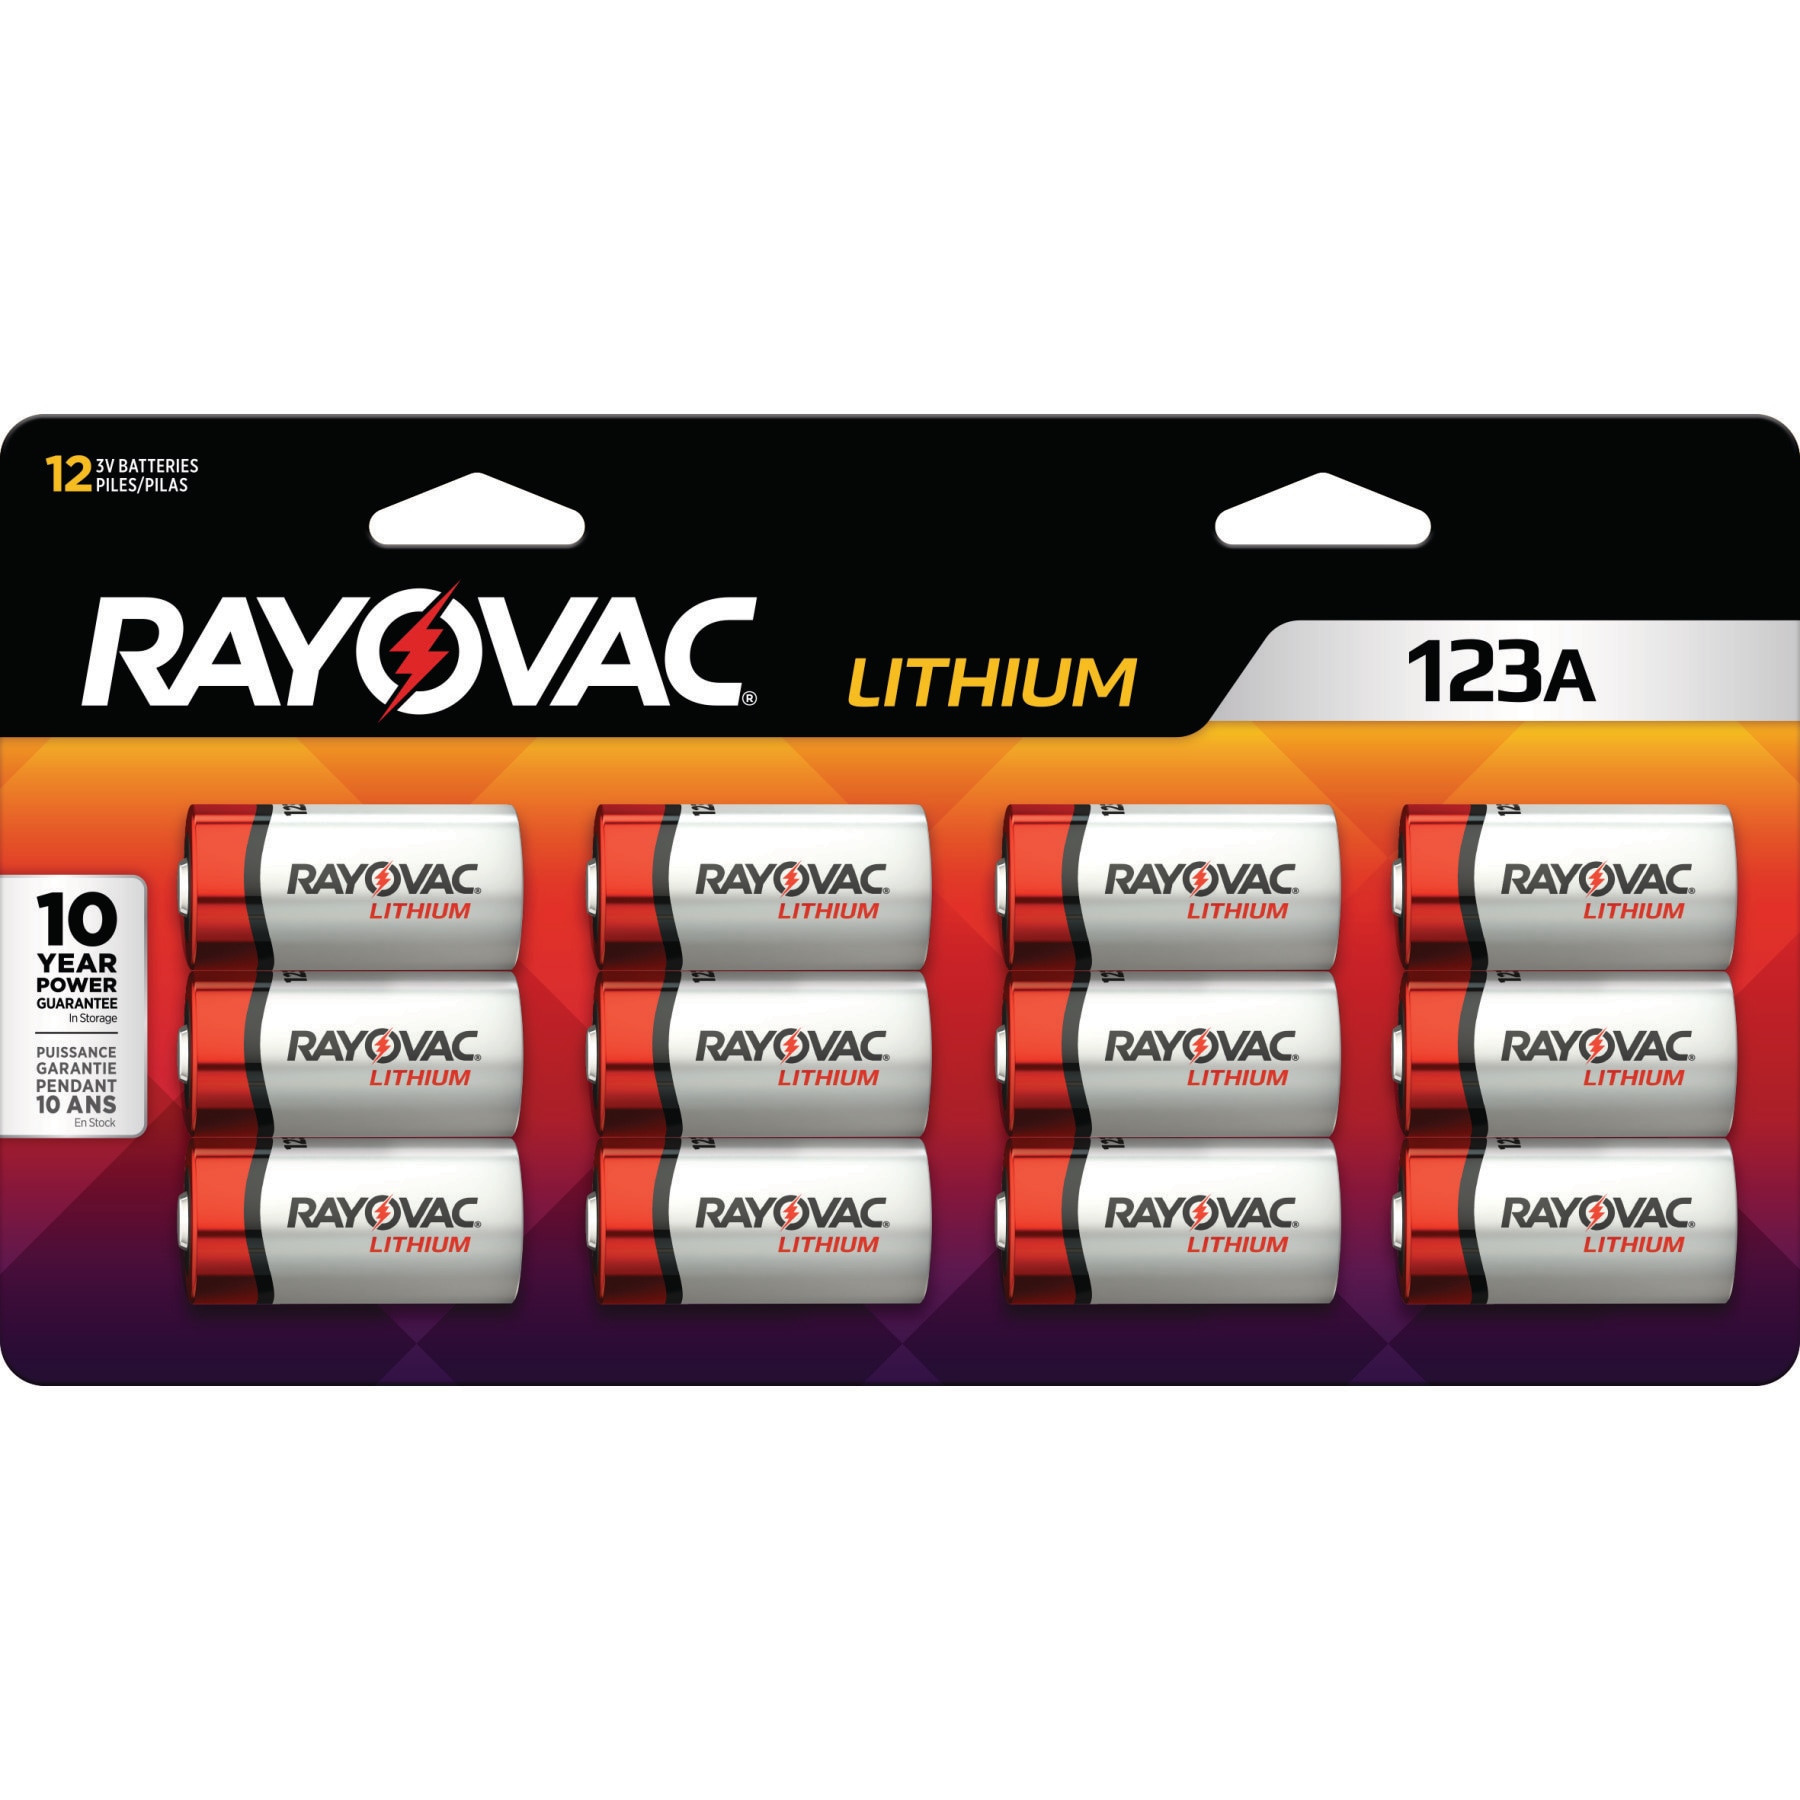 Duracell 123 lithium 123 Digital Camera Batteries (6-Pack) in the Device  Replacement Batteries department at